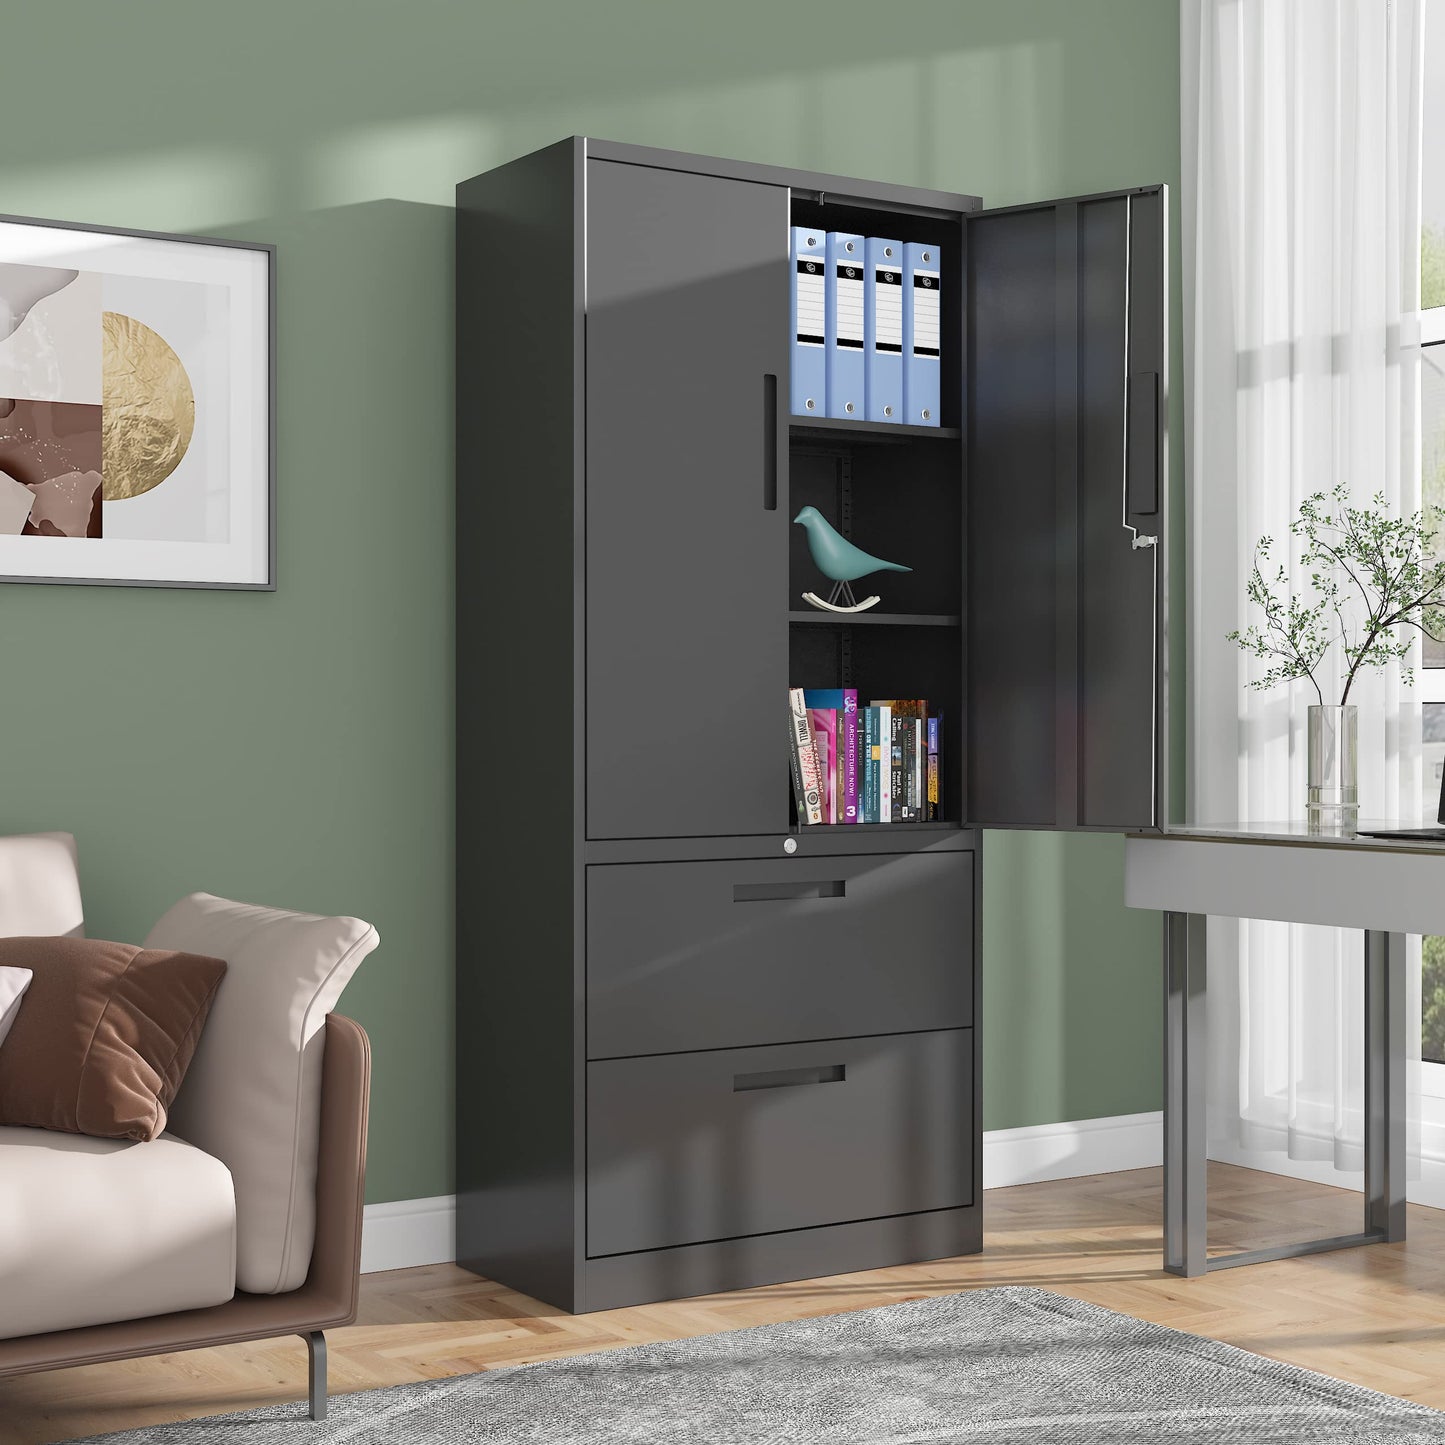 SISESOL Metal Storage Cabinet with Drawers, 71" File Cabinets for Home Office, Locking Steel Storage Cabinet with Doors and Shelves for Home, Office,